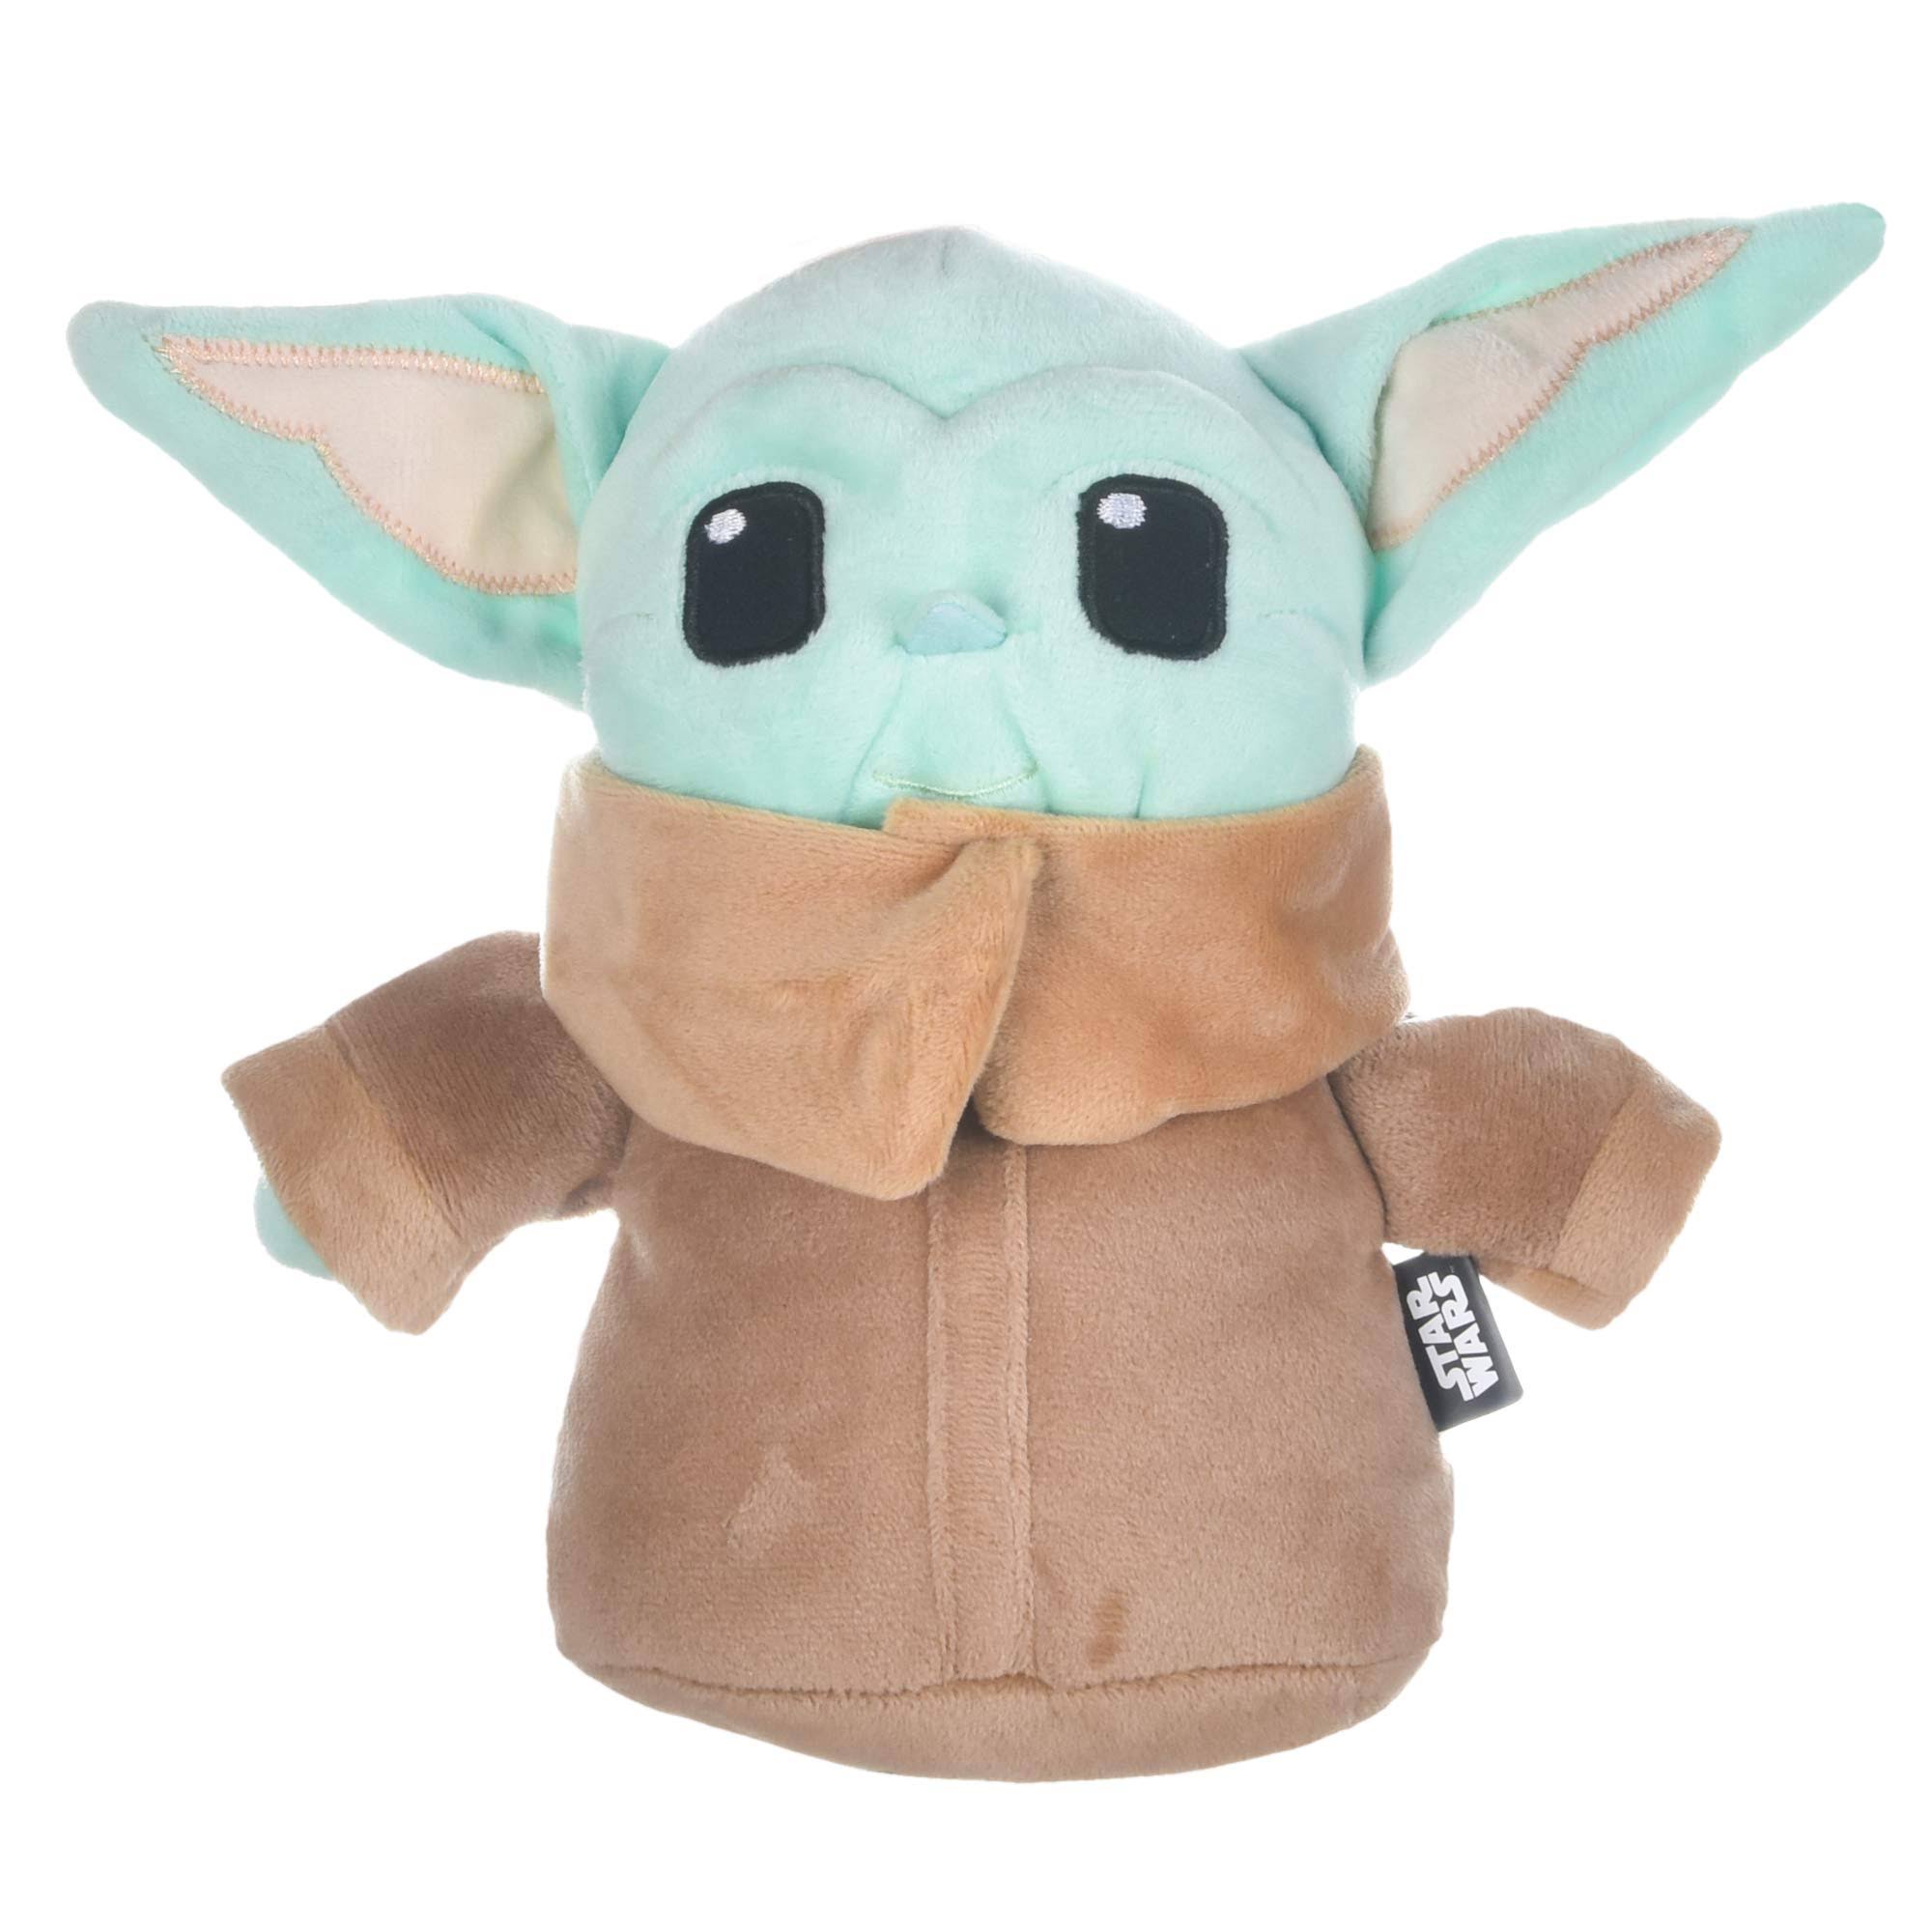 Star Wars Mandalorian The Child Plush Dog Toy, 6-in Fetch for Pets